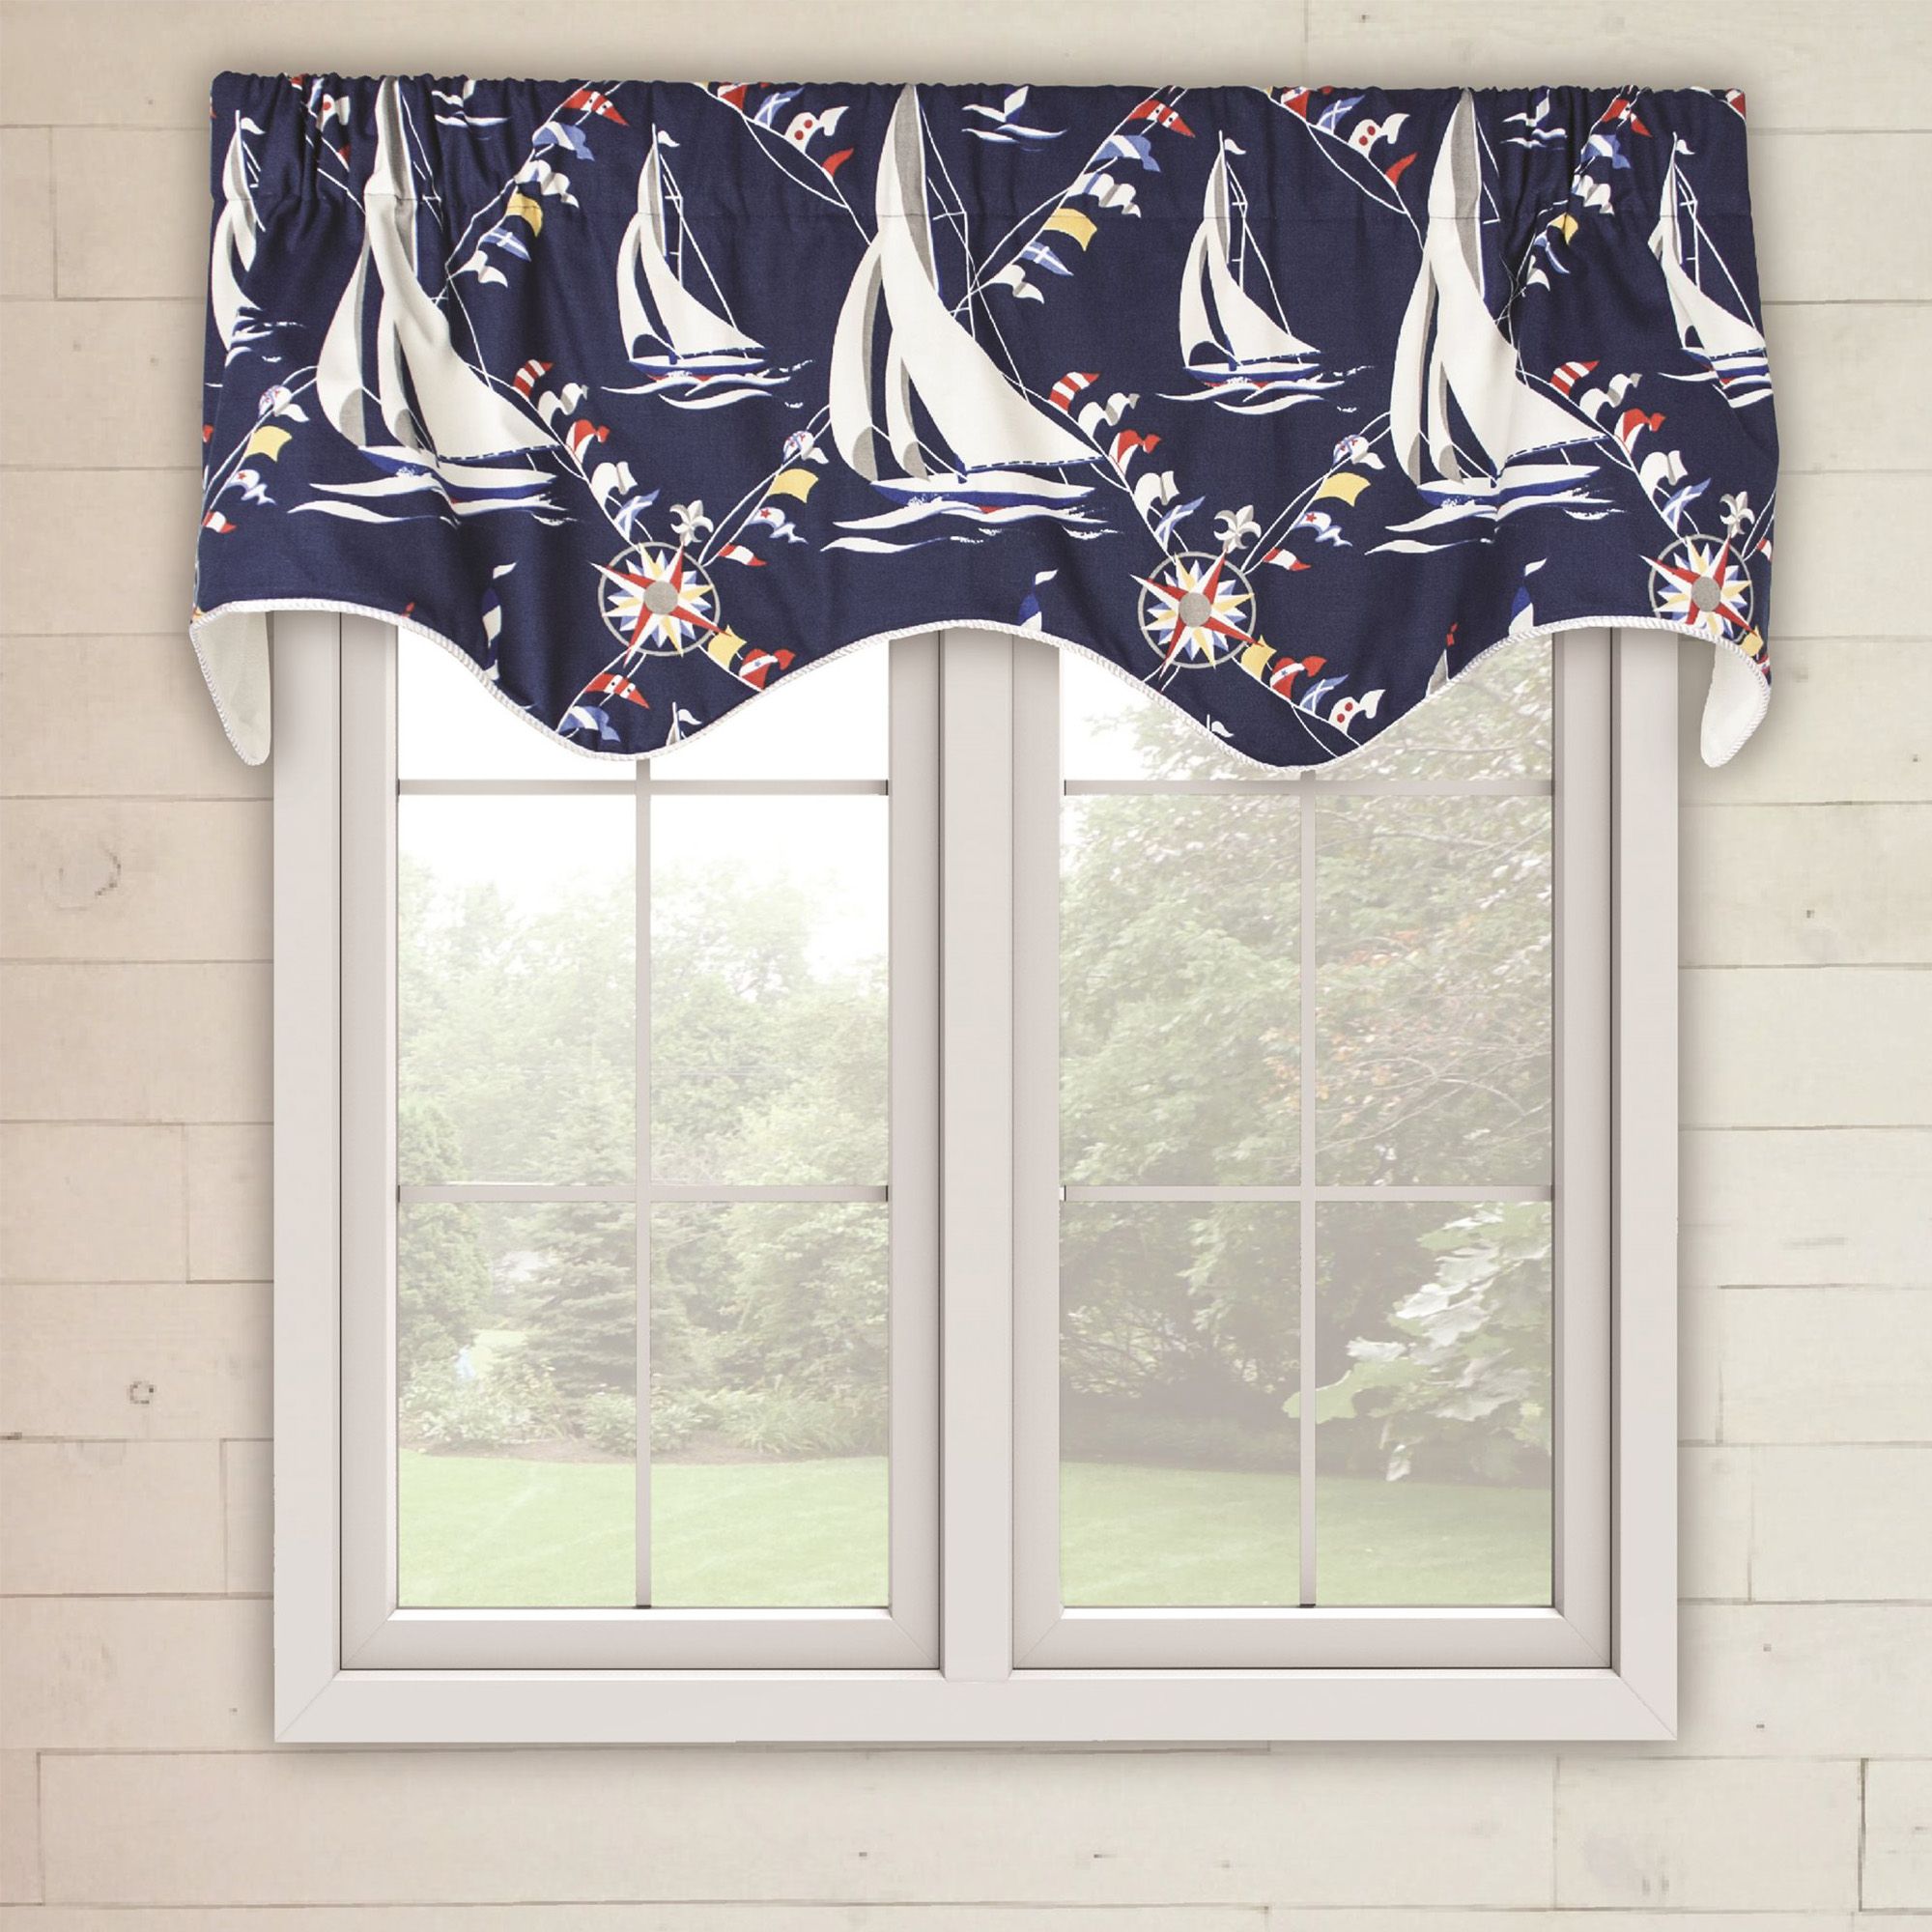 Details About Ellis Curtain Nautical Sail Scallop Window Valance With Rod  Pocket, 50x16 Navy Within Hudson Pintuck Window Curtain Valances (View 7 of 20)